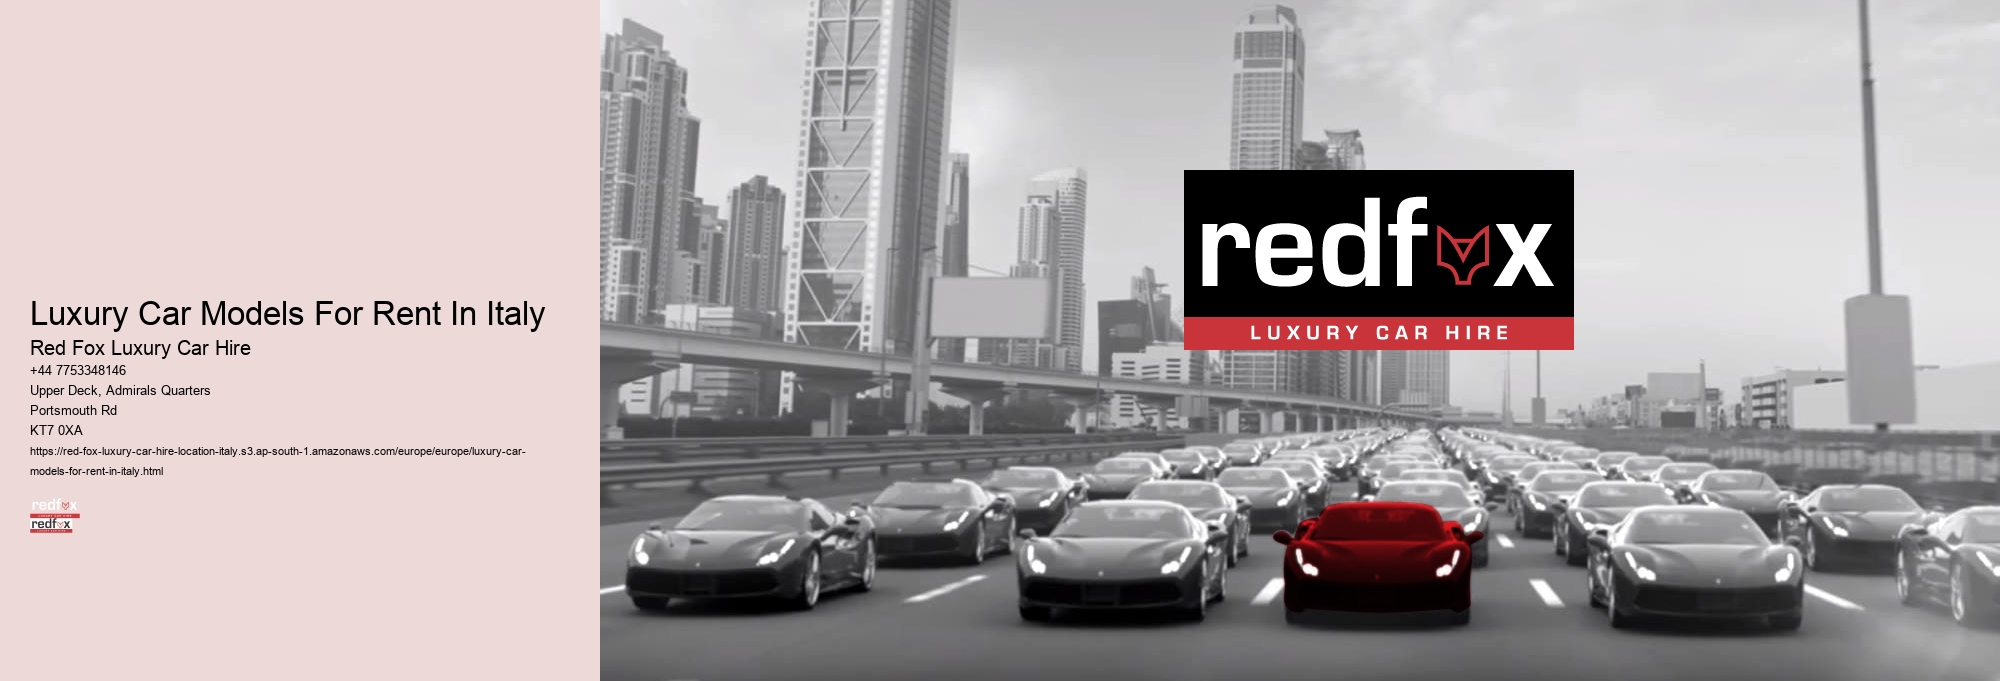 Luxury Car Models For Rent In Italy